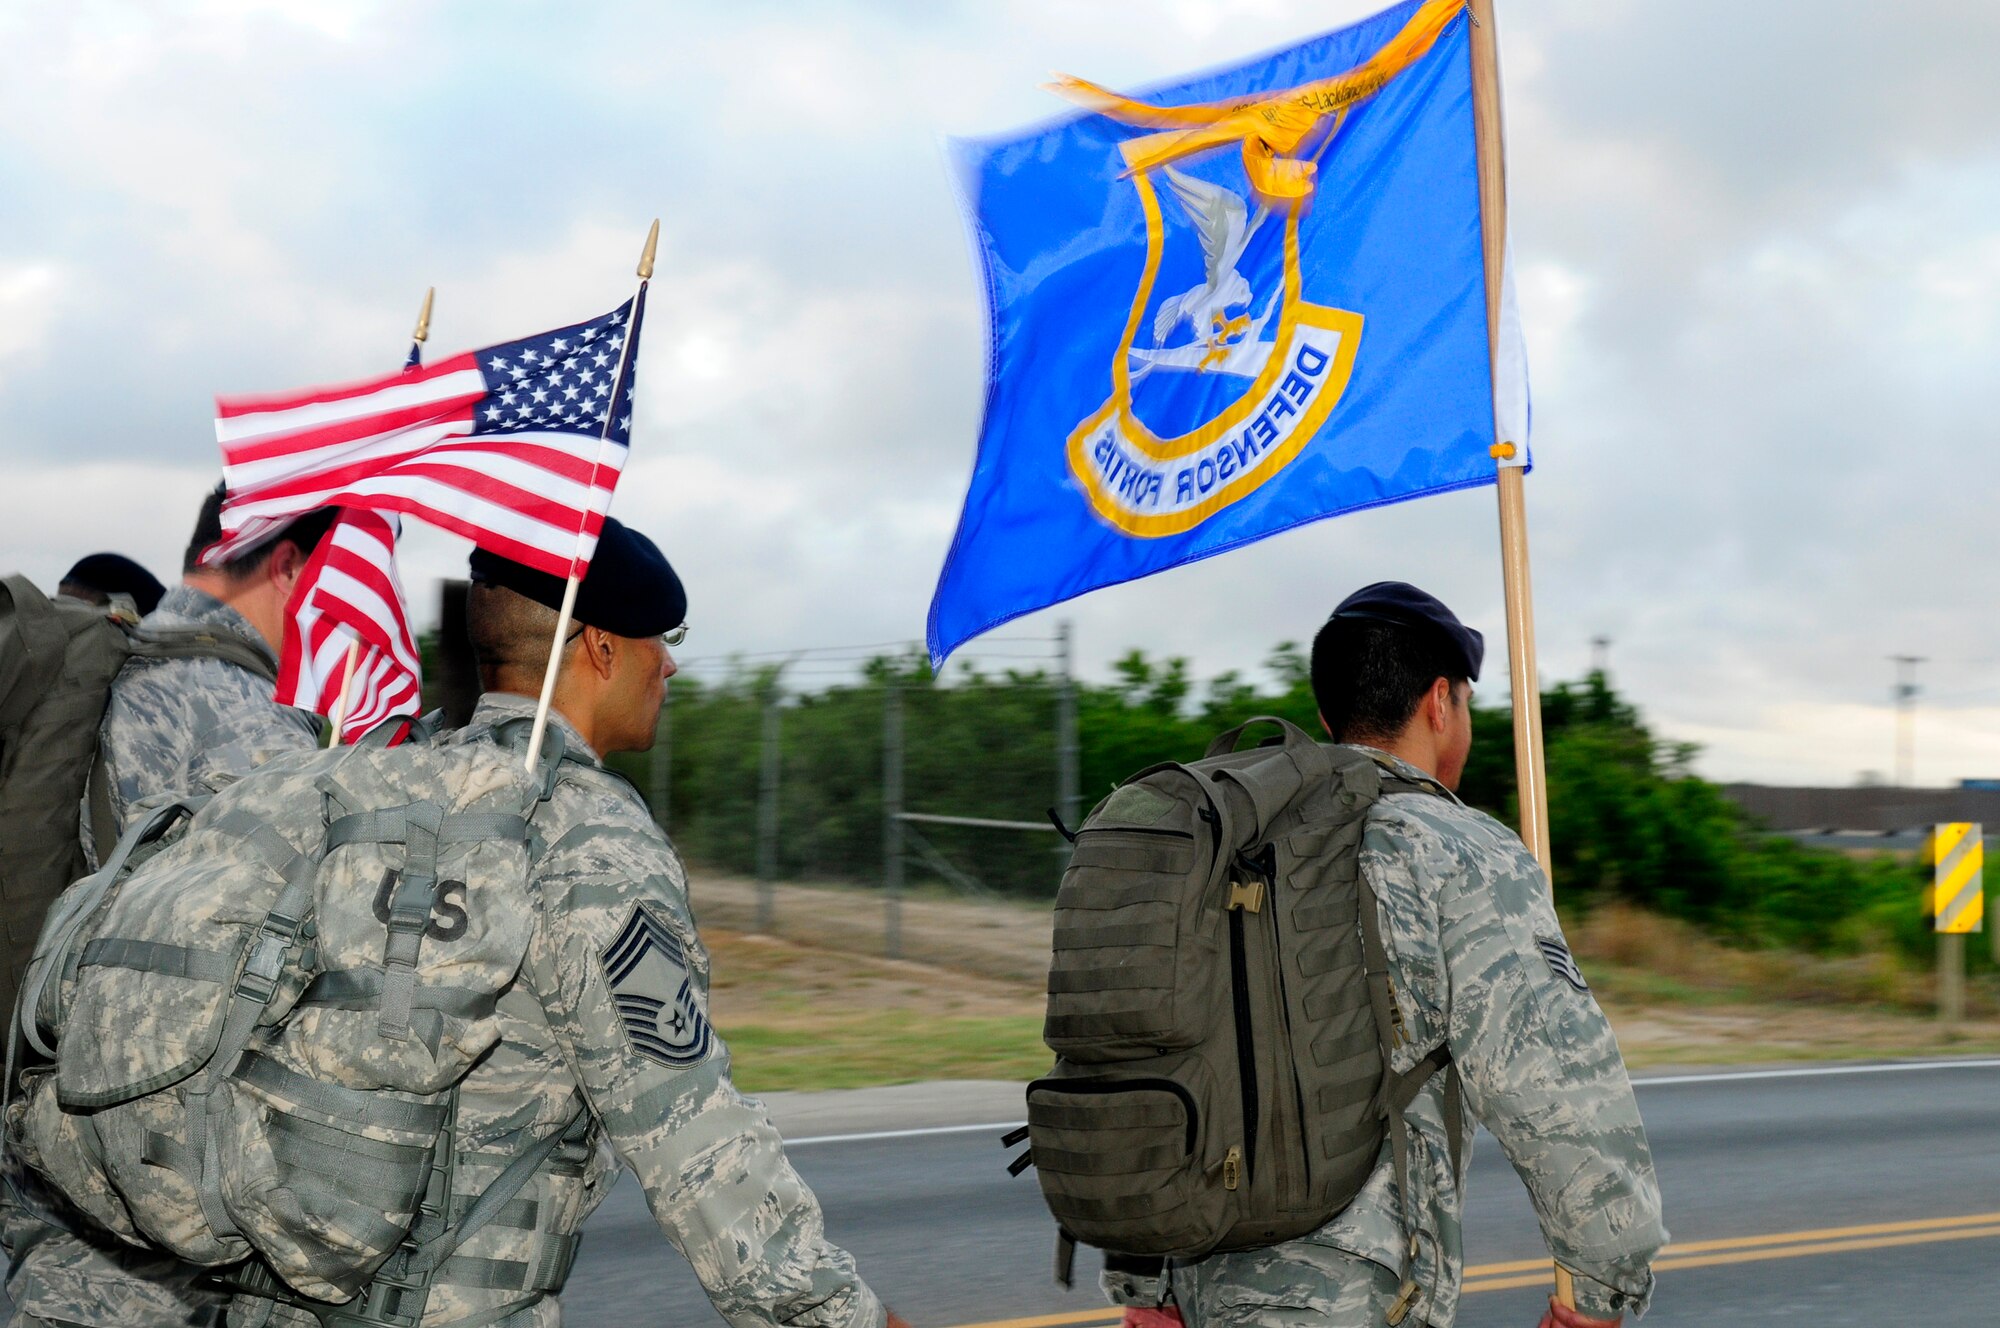 Chief Master Sgt. Domingo Ortega, the top-ranked senior noncommissioned officer assigned to the Texas Air National Guard's 149th Fighter Wing, participates in "The Ruck March to Remember 9/11", which began at Lackland Air Force Base, Texas, July 12, 2011.
(Air National Guard photo by Senior Master Sgt. Miguel D. Arellano/Released)